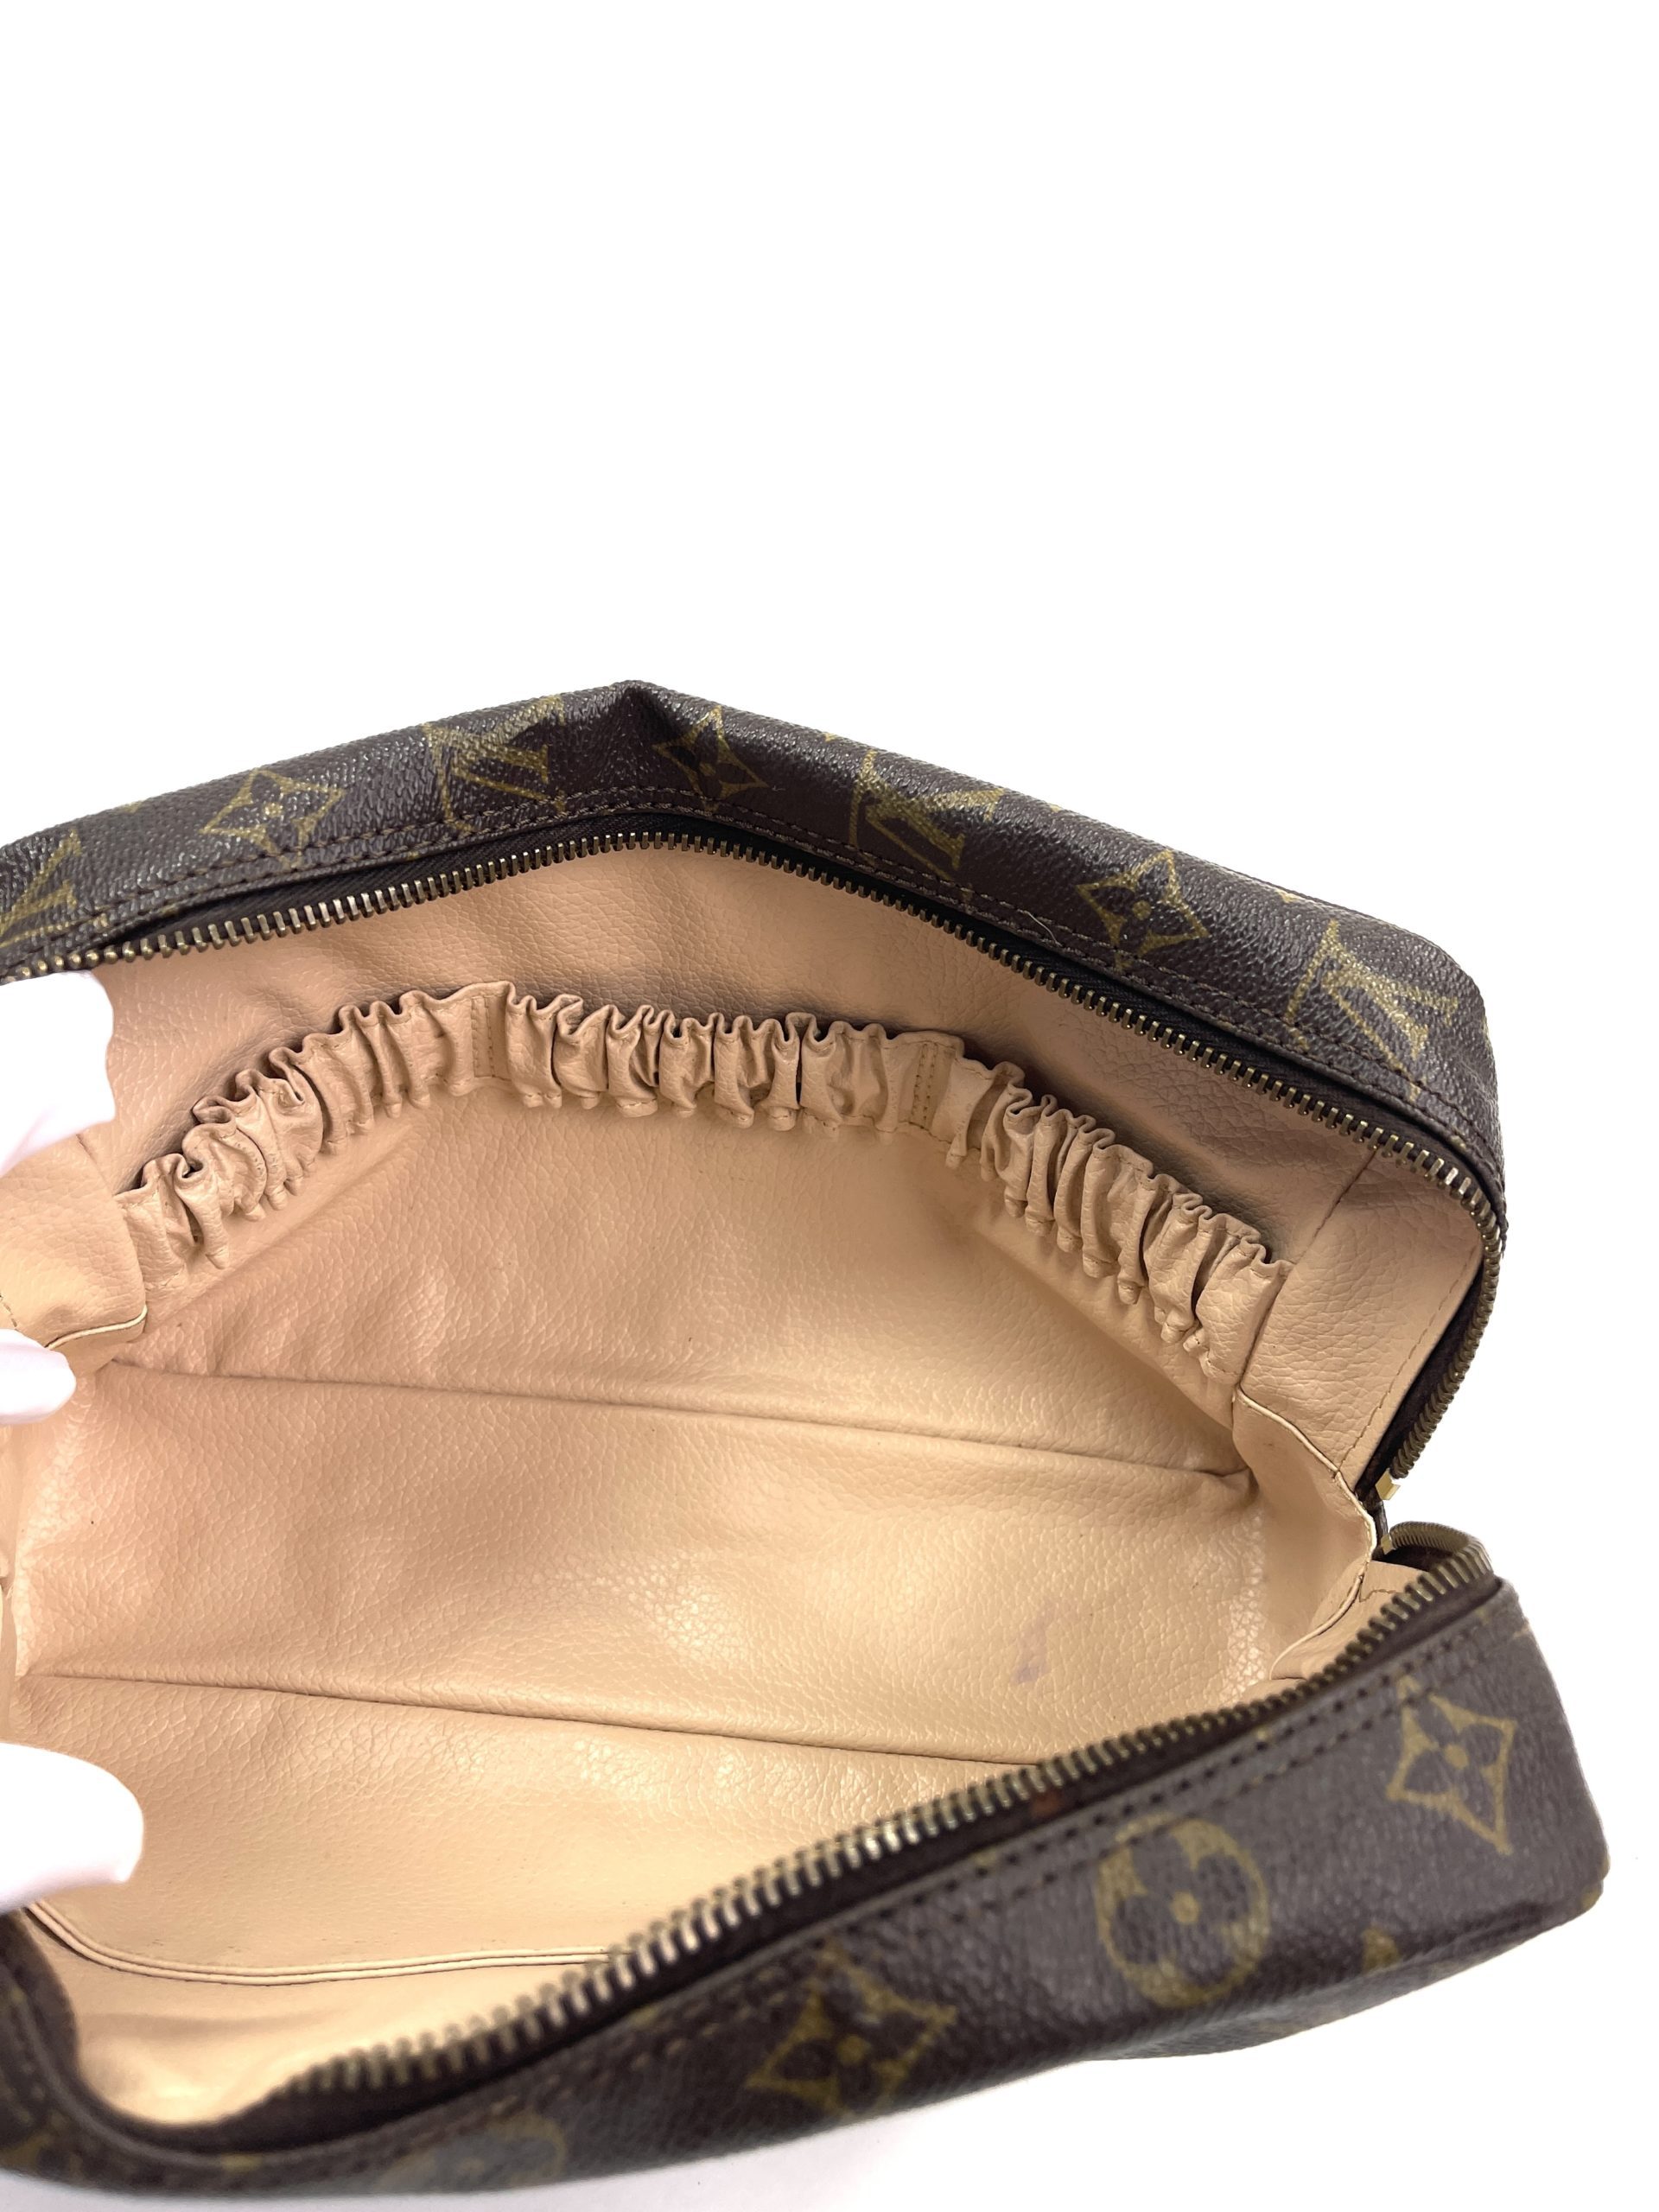 Toiletry Pouch On Chain Autres Toiles Monogram - Women - Small Leather  Goods